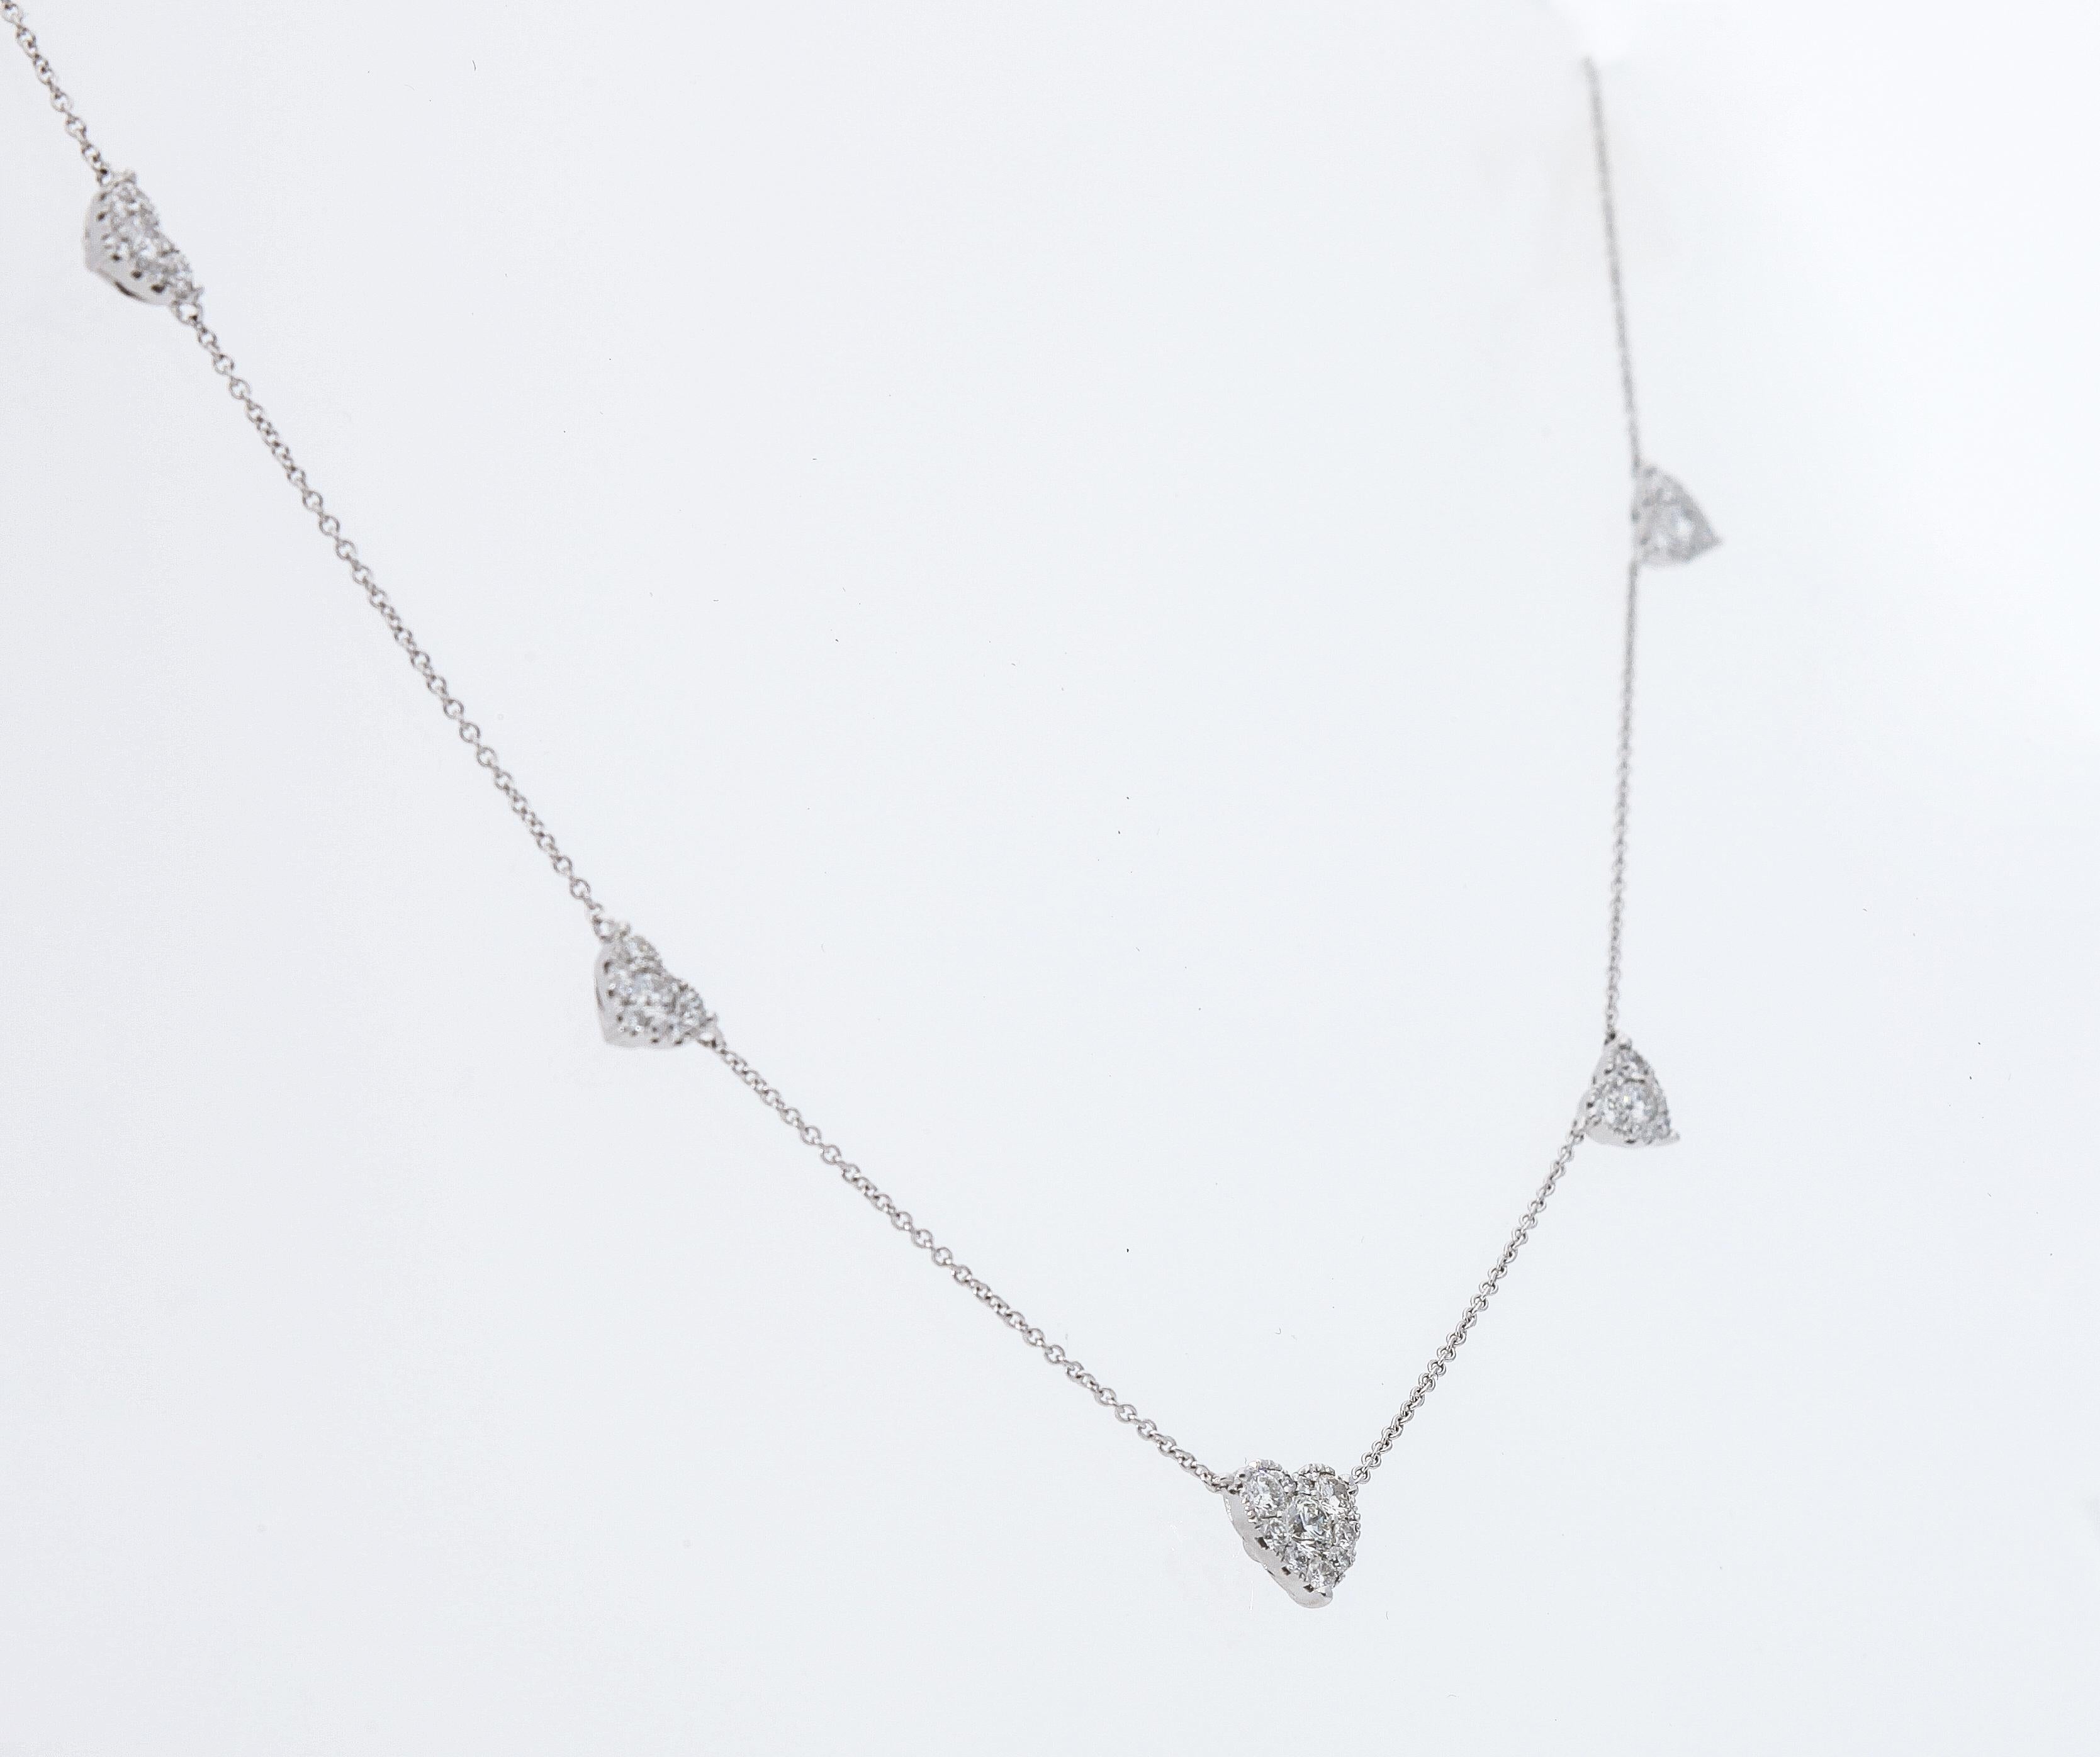 Chain necklace in 18 karat white gold and five drop pendant with diamonds
Total diamonds weight: 0.85 carat
Total length: 45 cm / 17.7 inch

The necklace has an additional ring for different neck size. You can change the length from 45 cm/ 17.7 inch